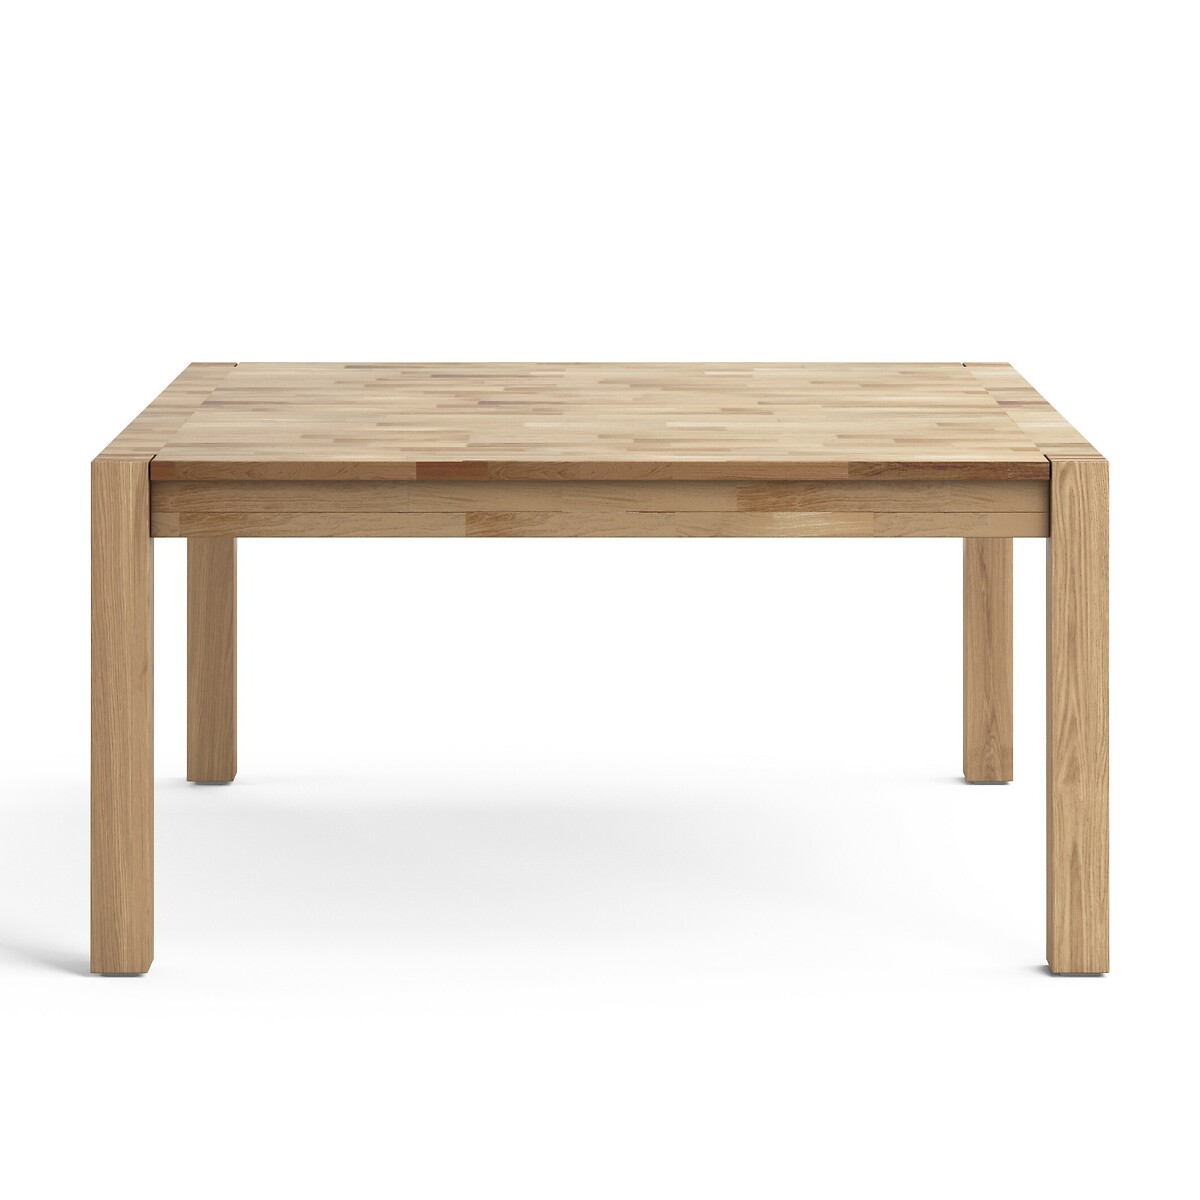 Adelita Square Oak Dining Table Seats, How Long Is Table That Seats 8